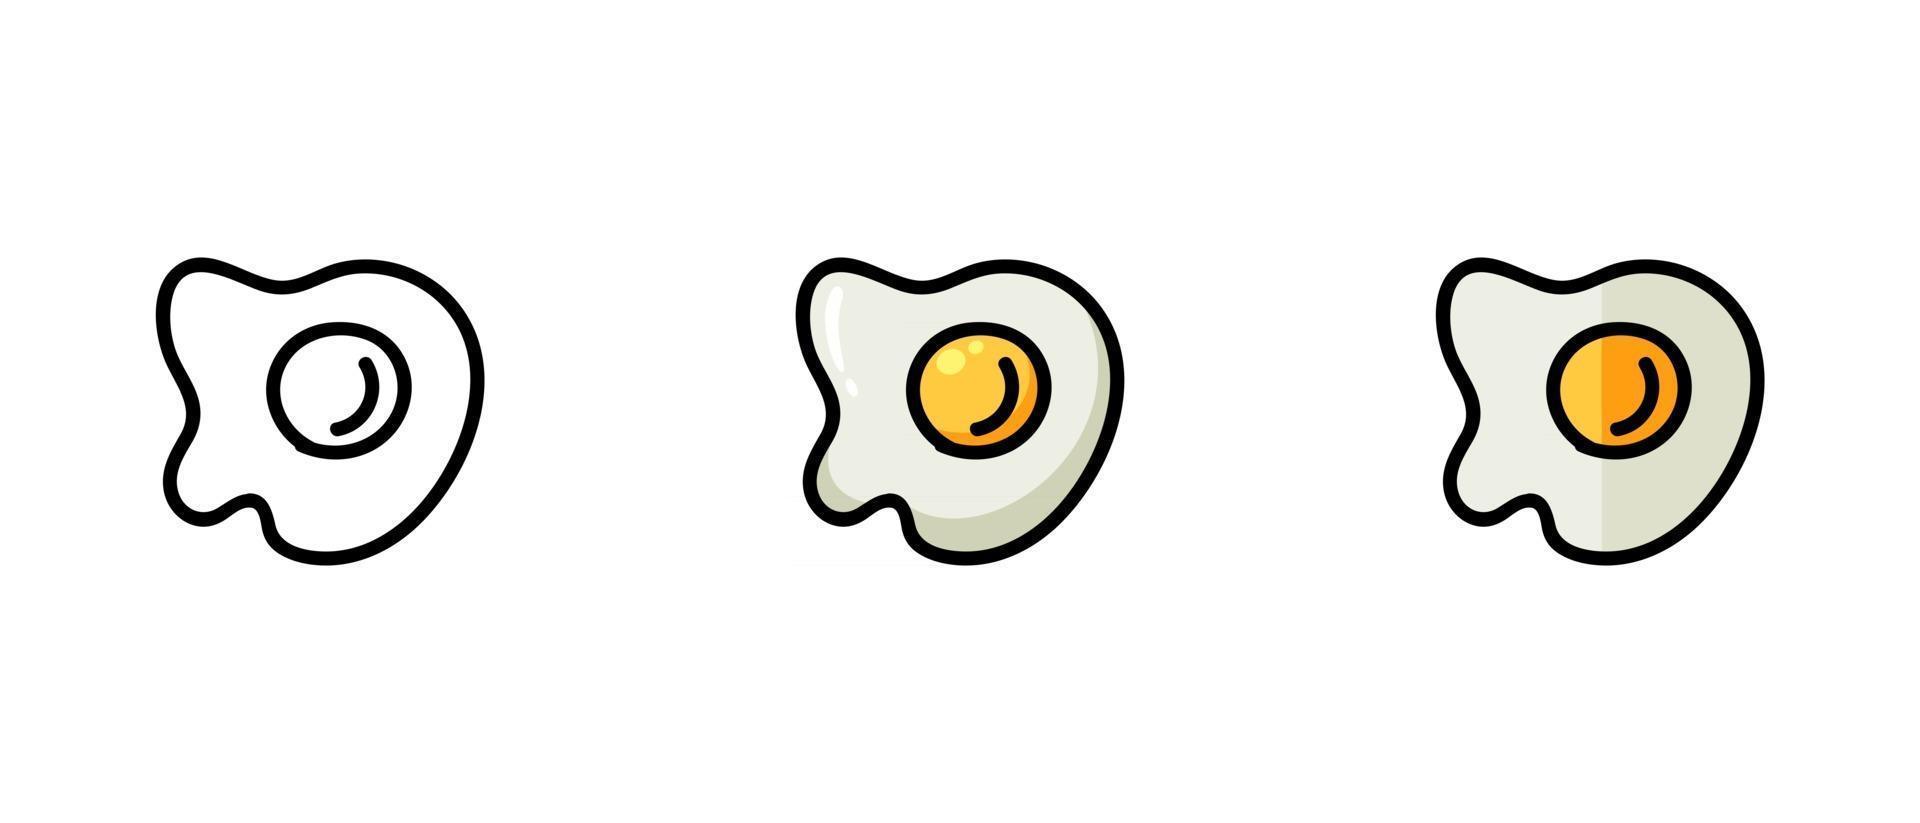 Contour and colored symbols of fried eggs vector